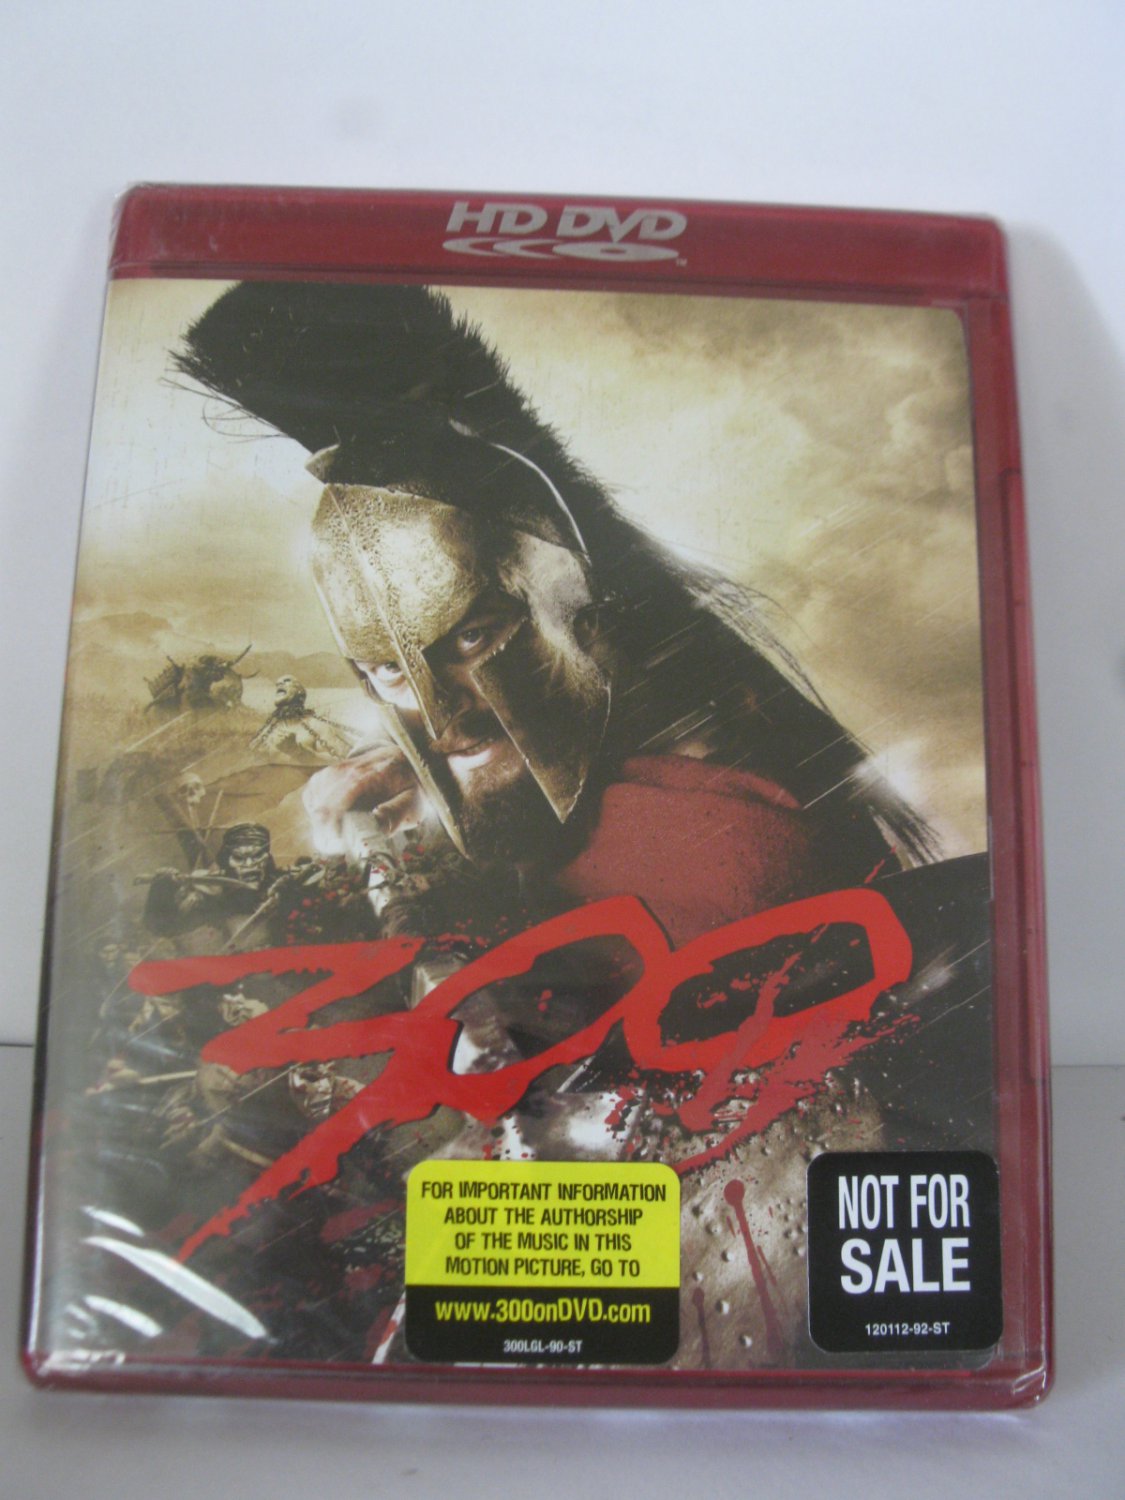 HD DVD Movie: 300 - Brand New , WB Factory Sealed